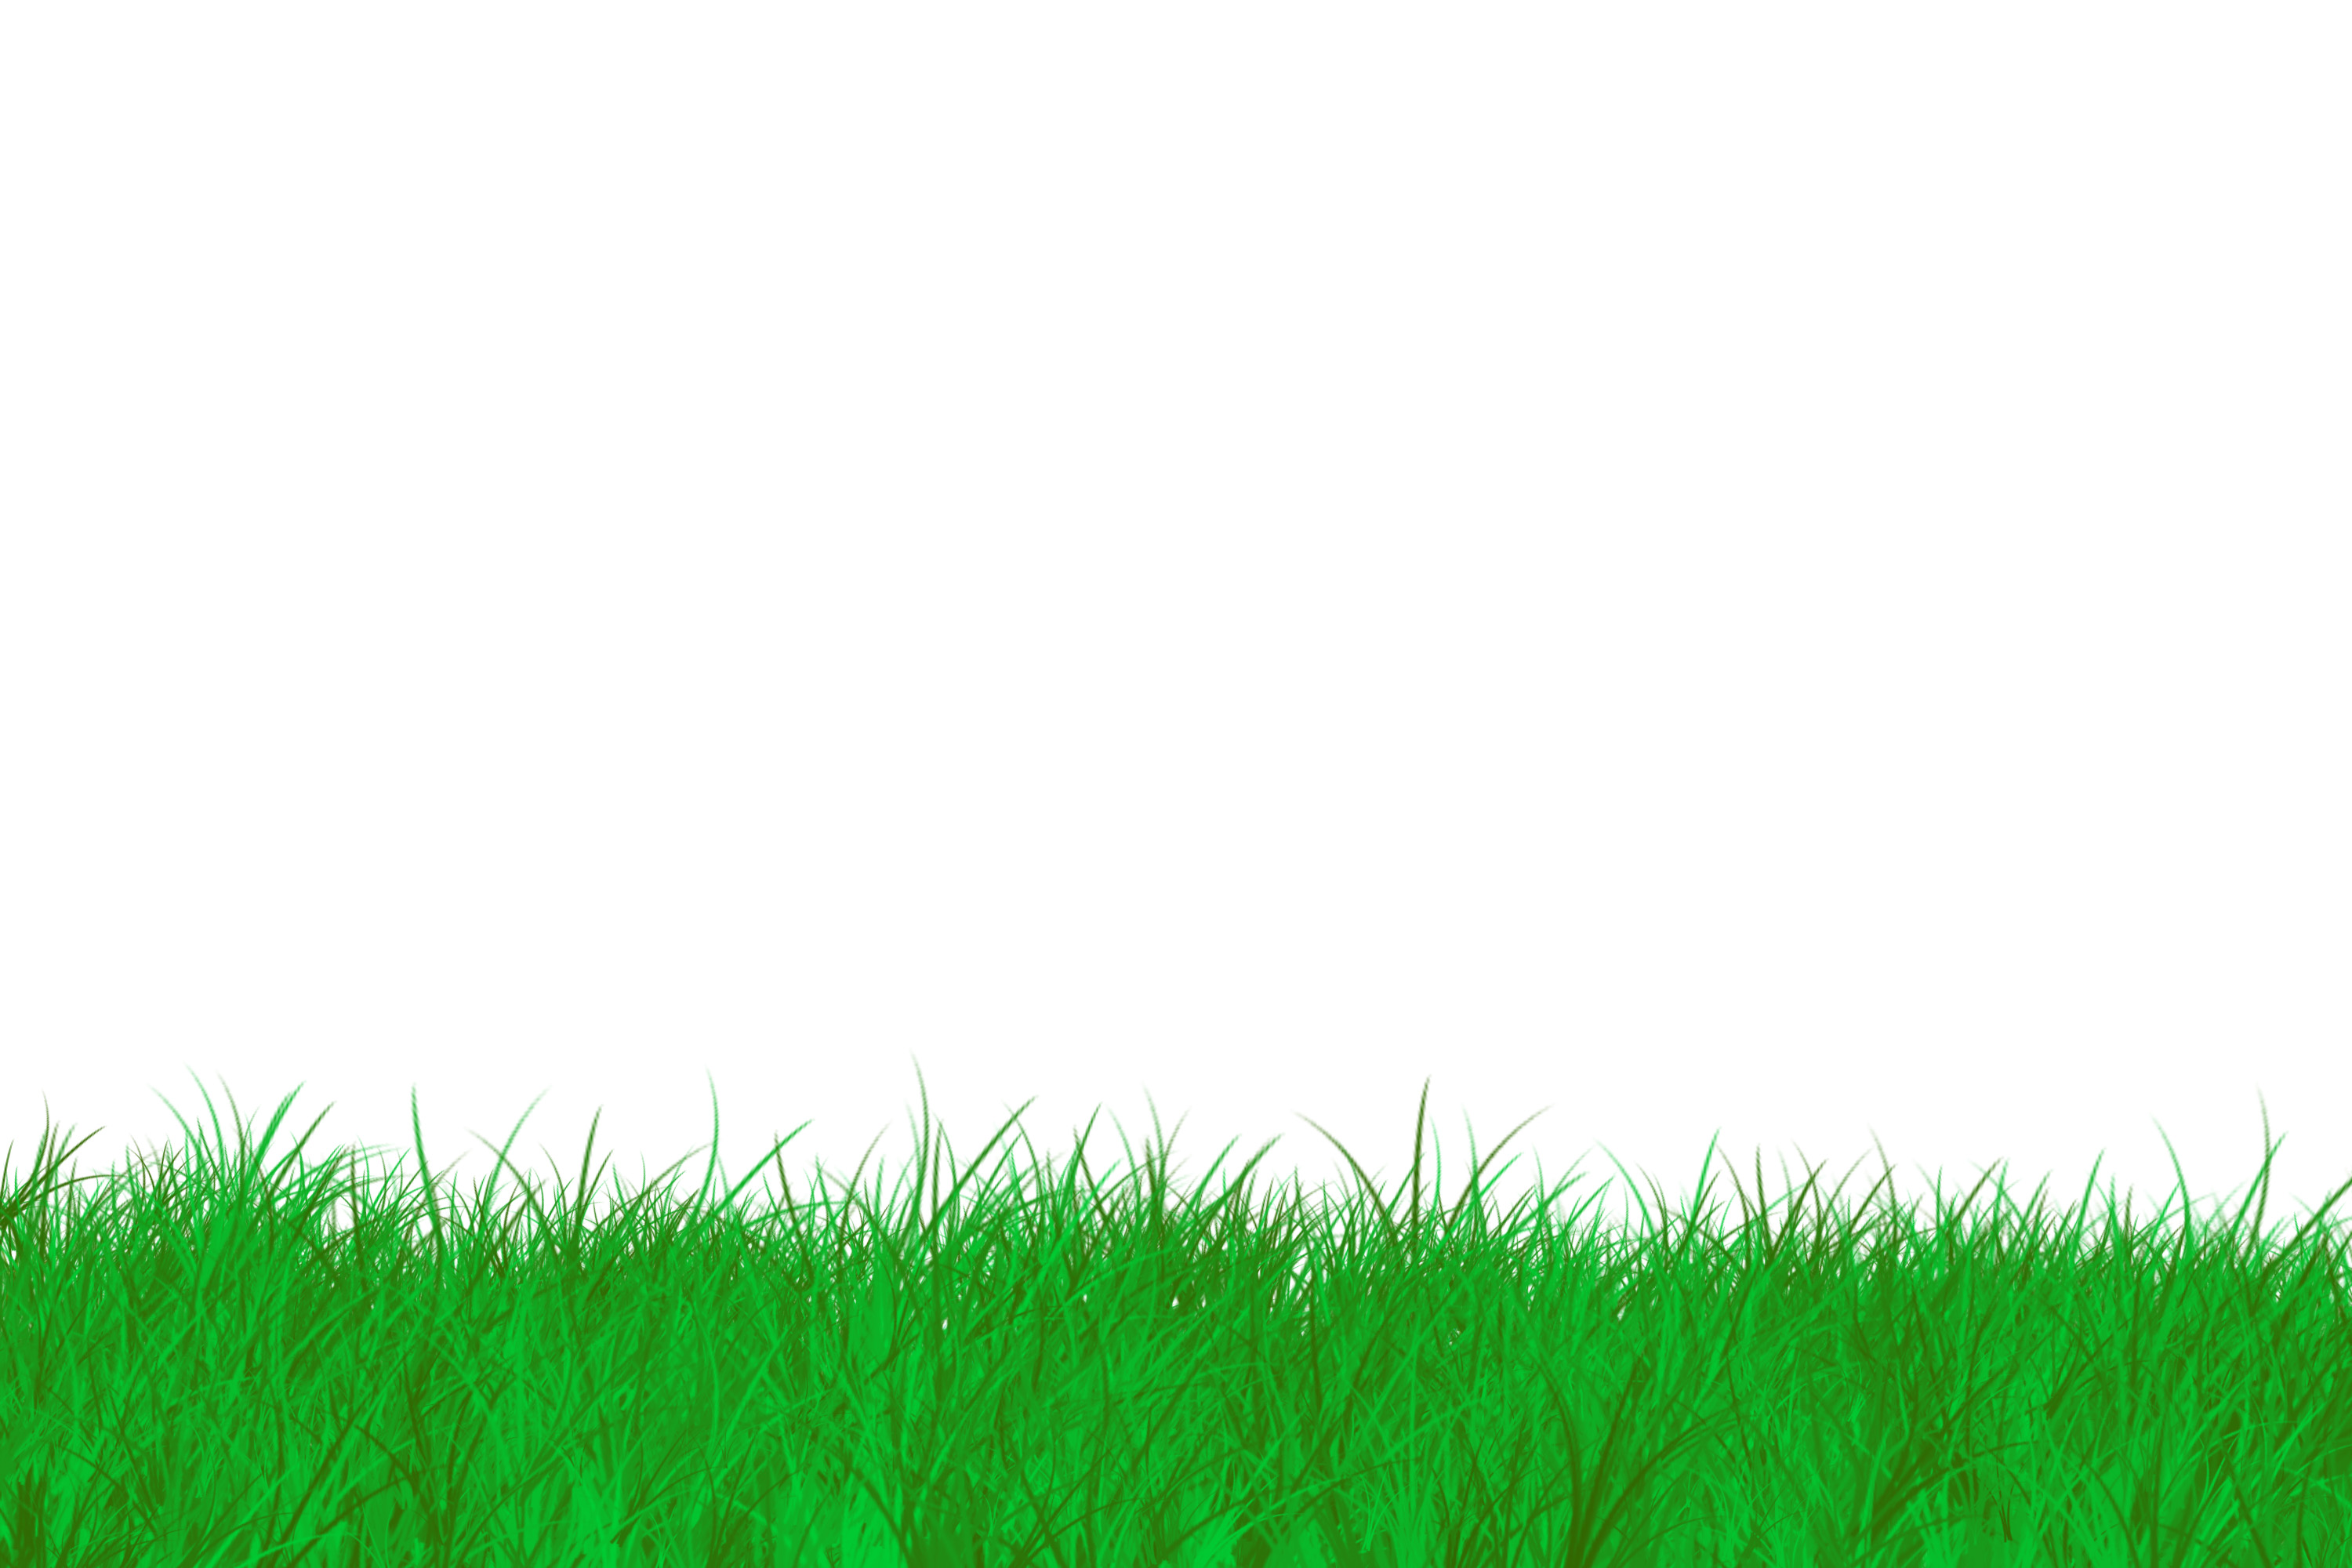 Top clip art grass border images for